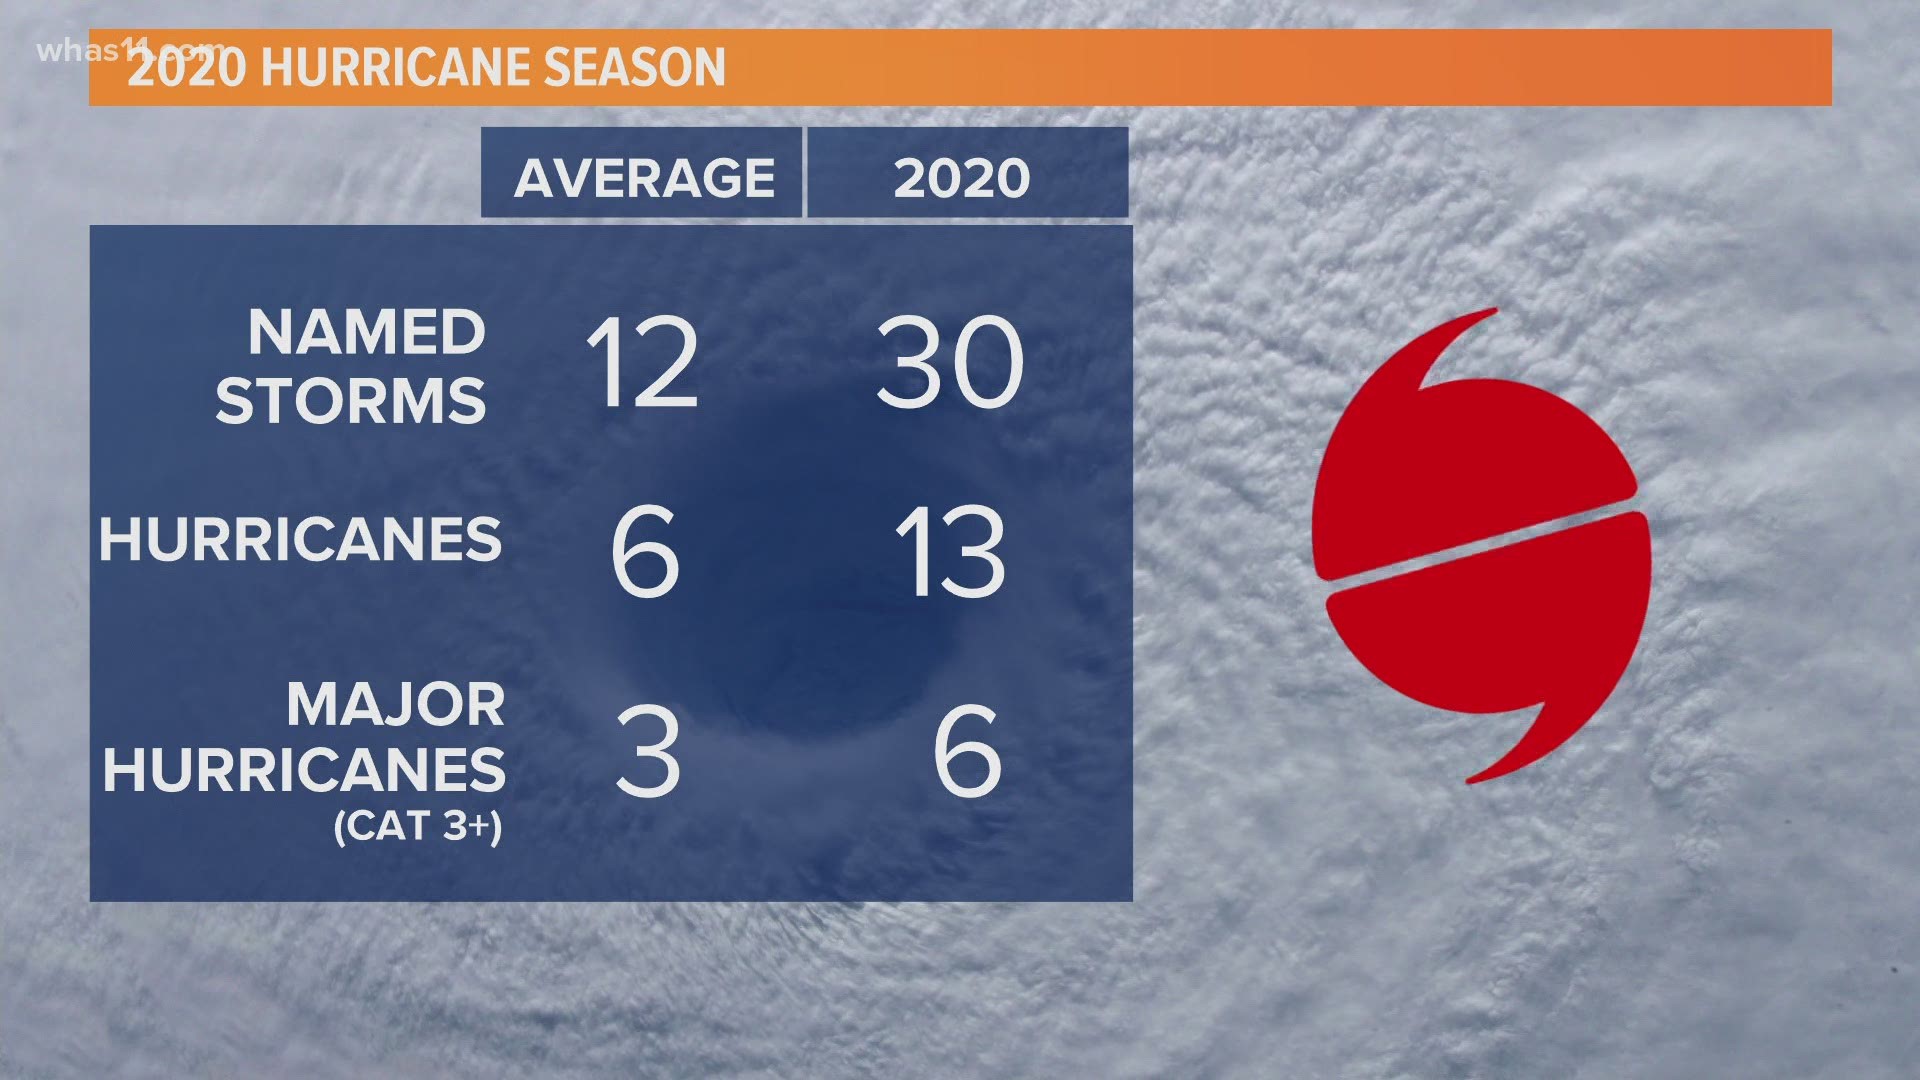 It has been a wild hurricane season, but with the start of meteorological winter, the season has finally ended.